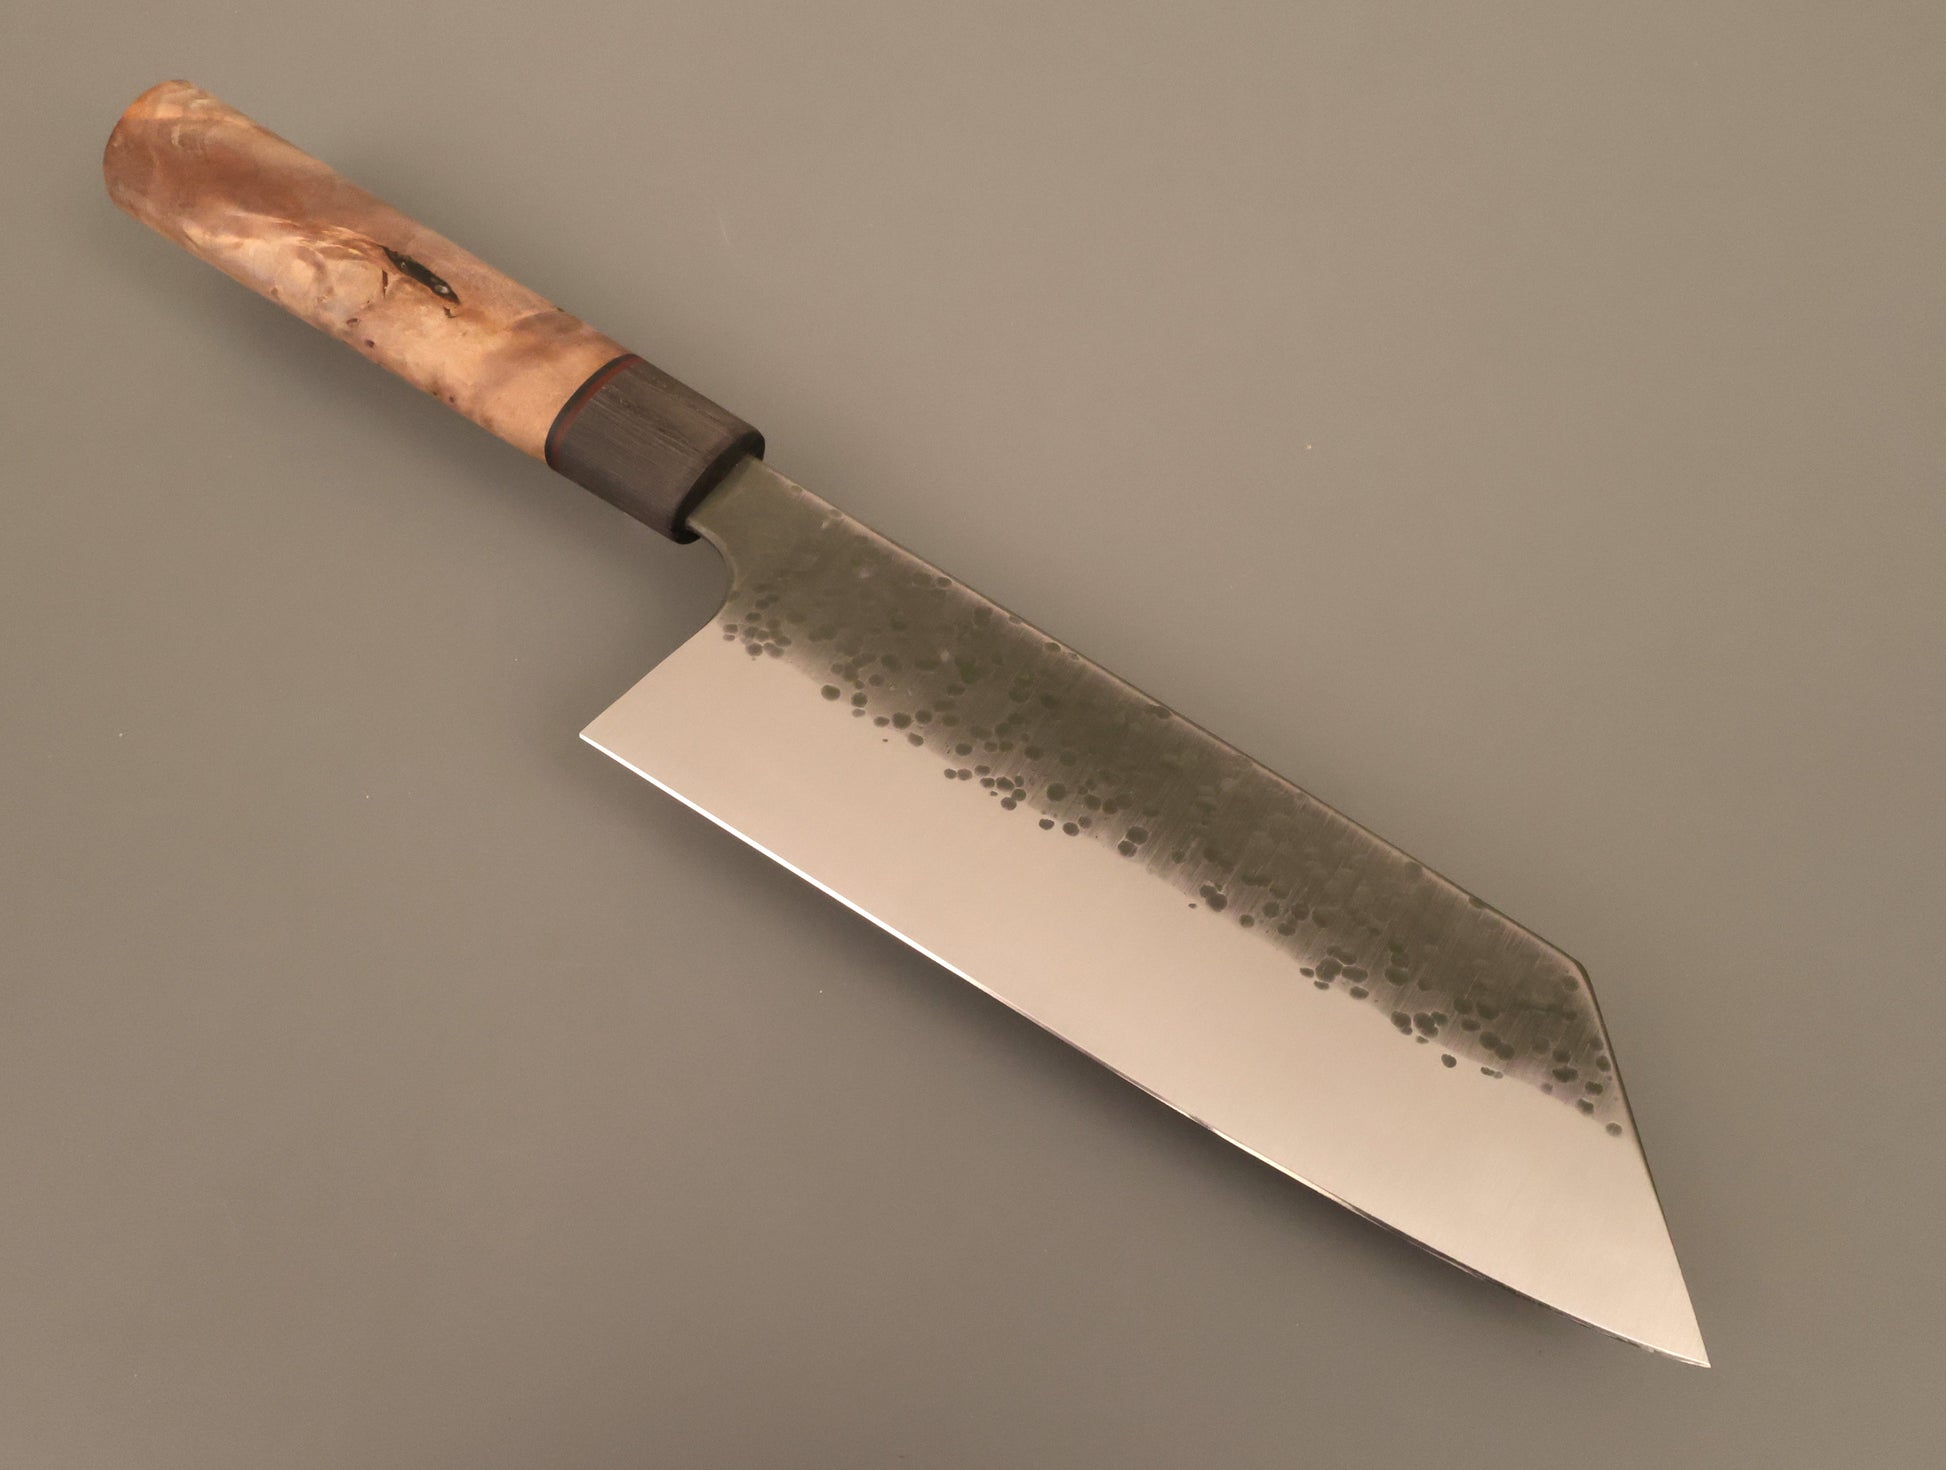 Bunka kitchen knife with hammered finish and wooden handle on gray background